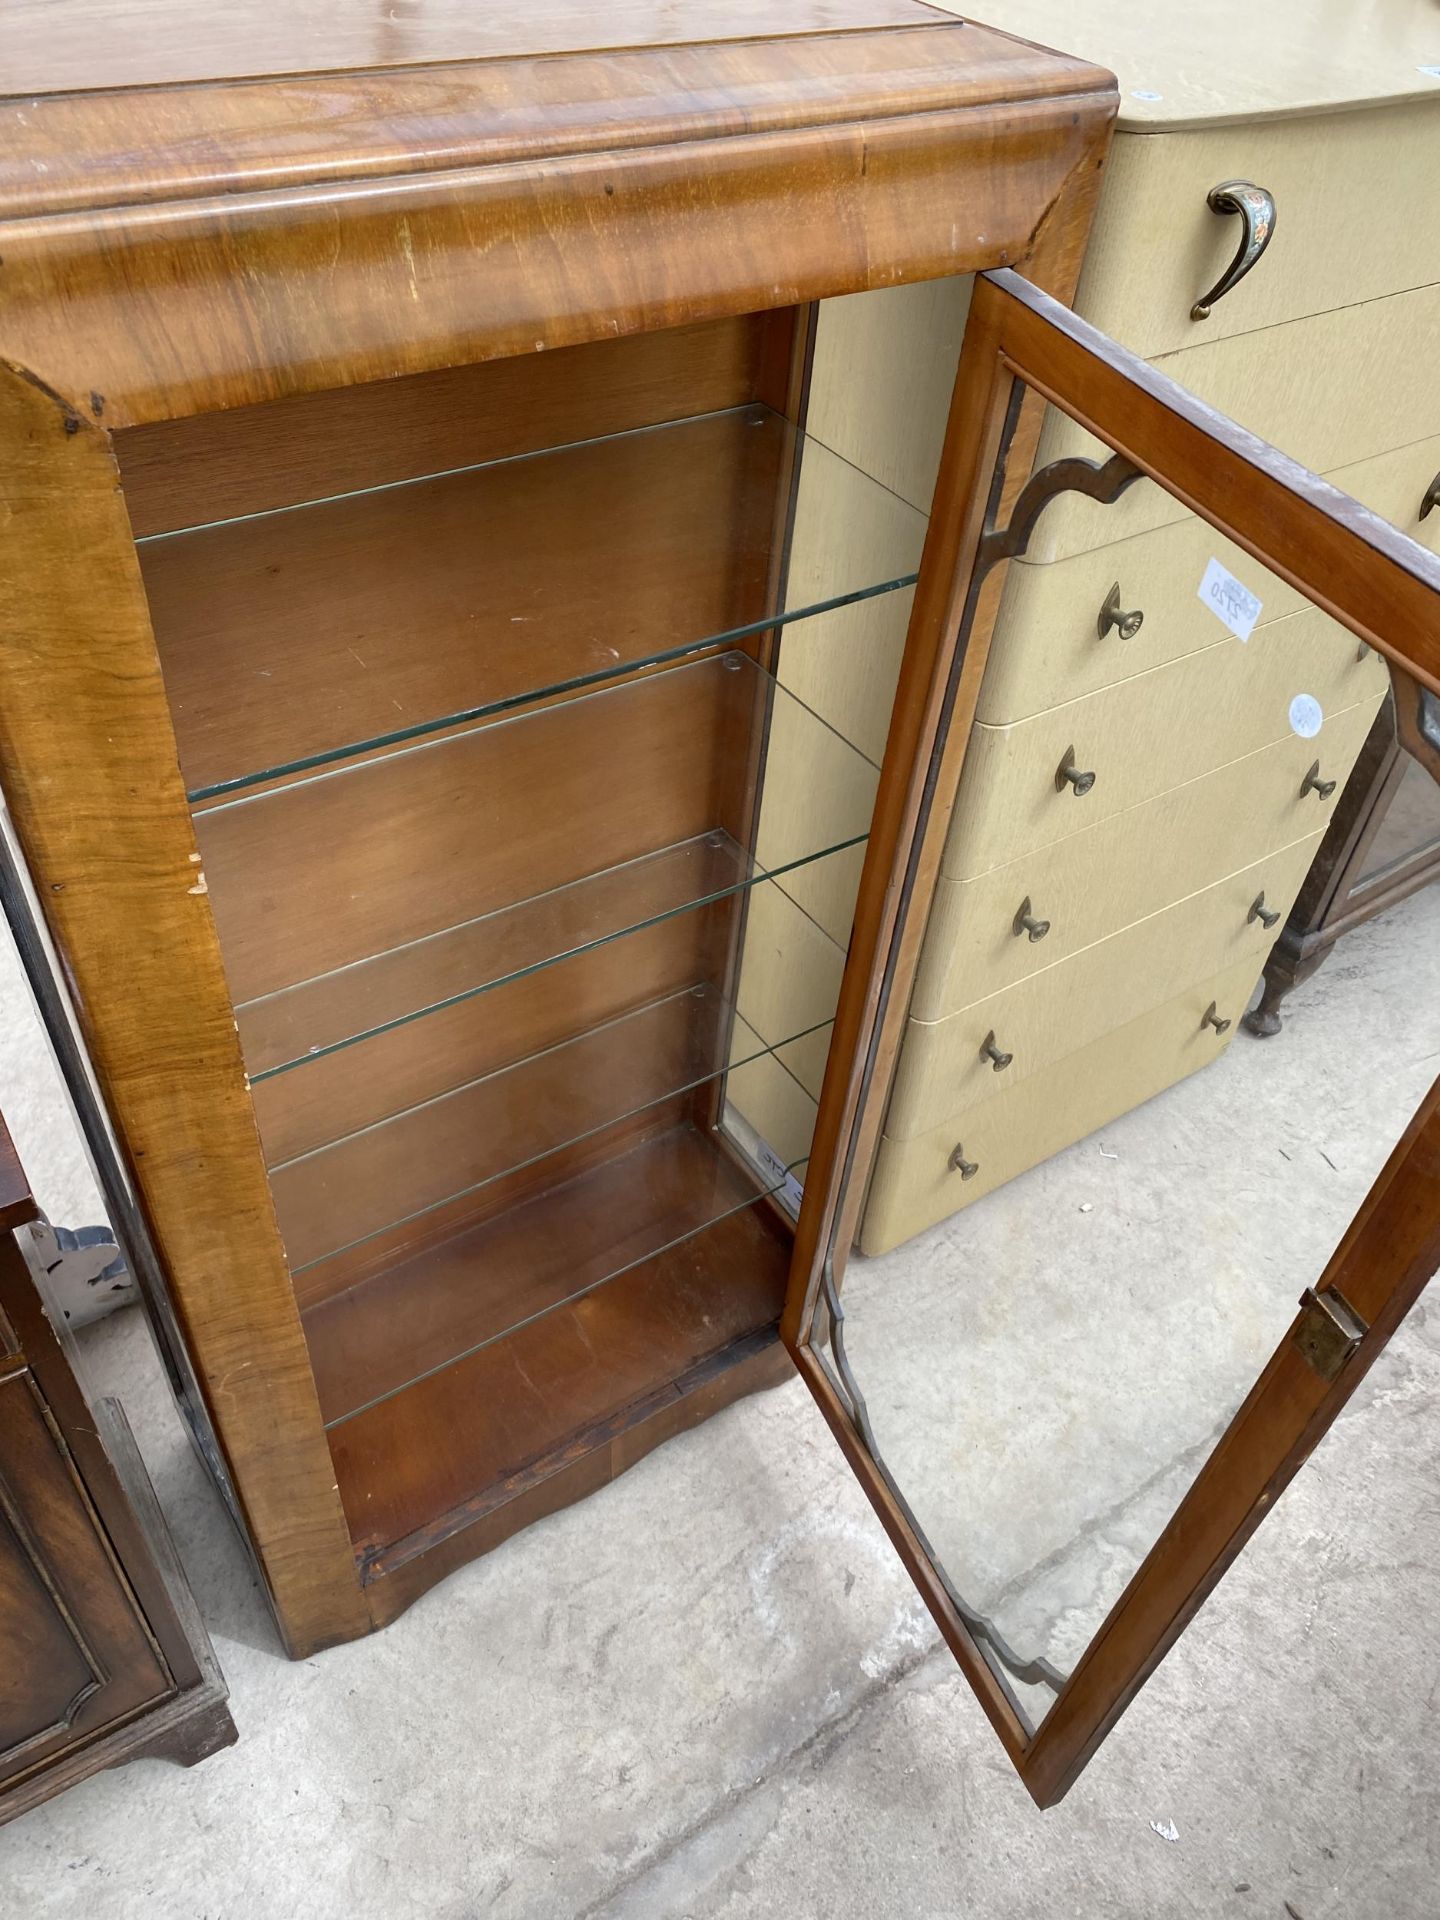 A MID 20TH CENTURY WALNUT CHINA CABINET, 24" WIDE - Image 4 of 4